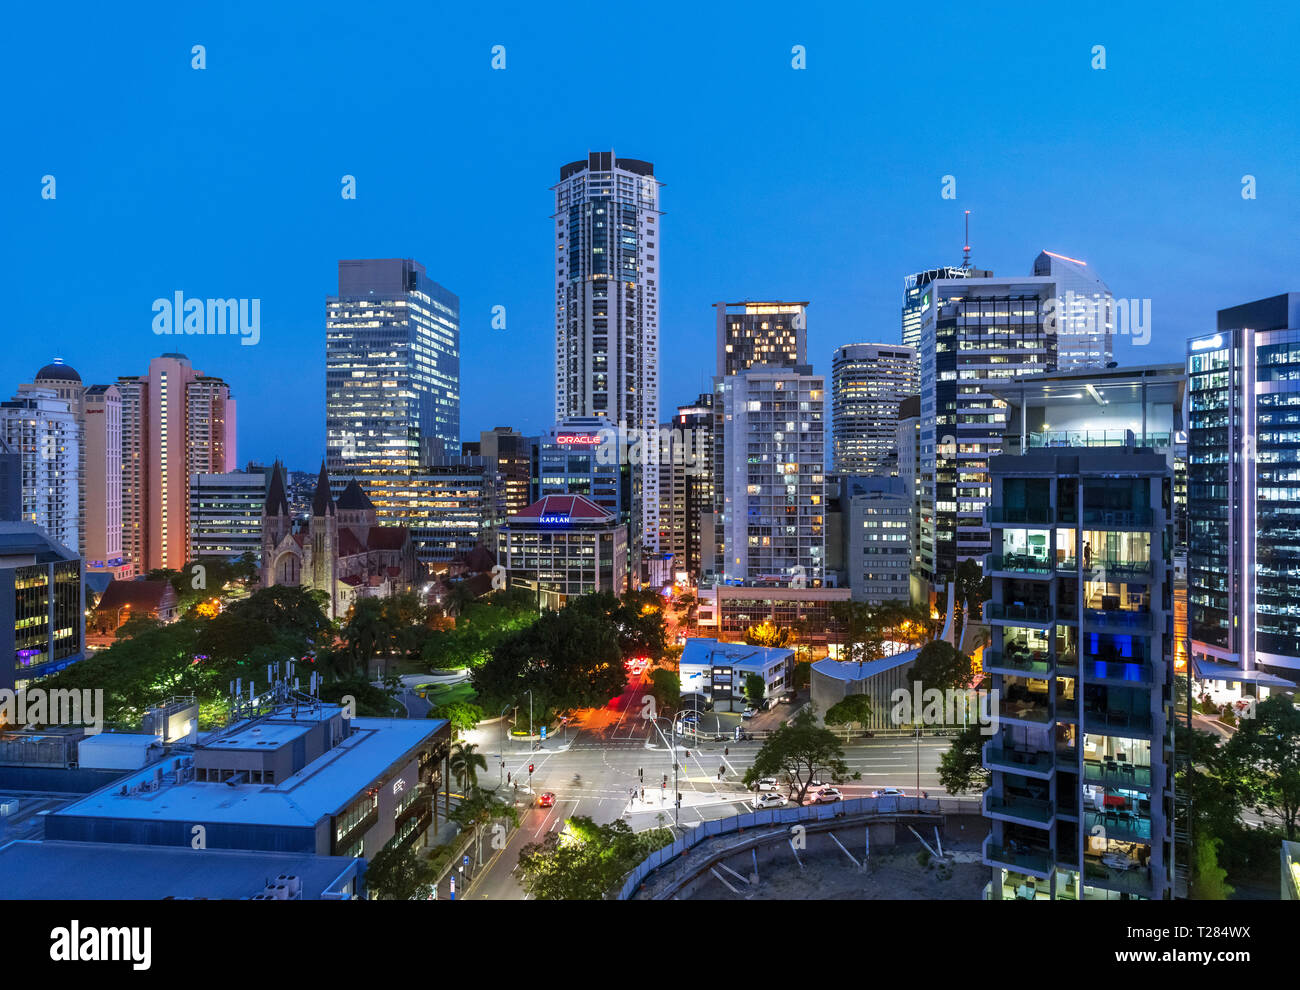 The skyline of the Central Business District (CBD) at night looking towards Cathedral Square, Brisbane, Queensland, Australia Stock Photo